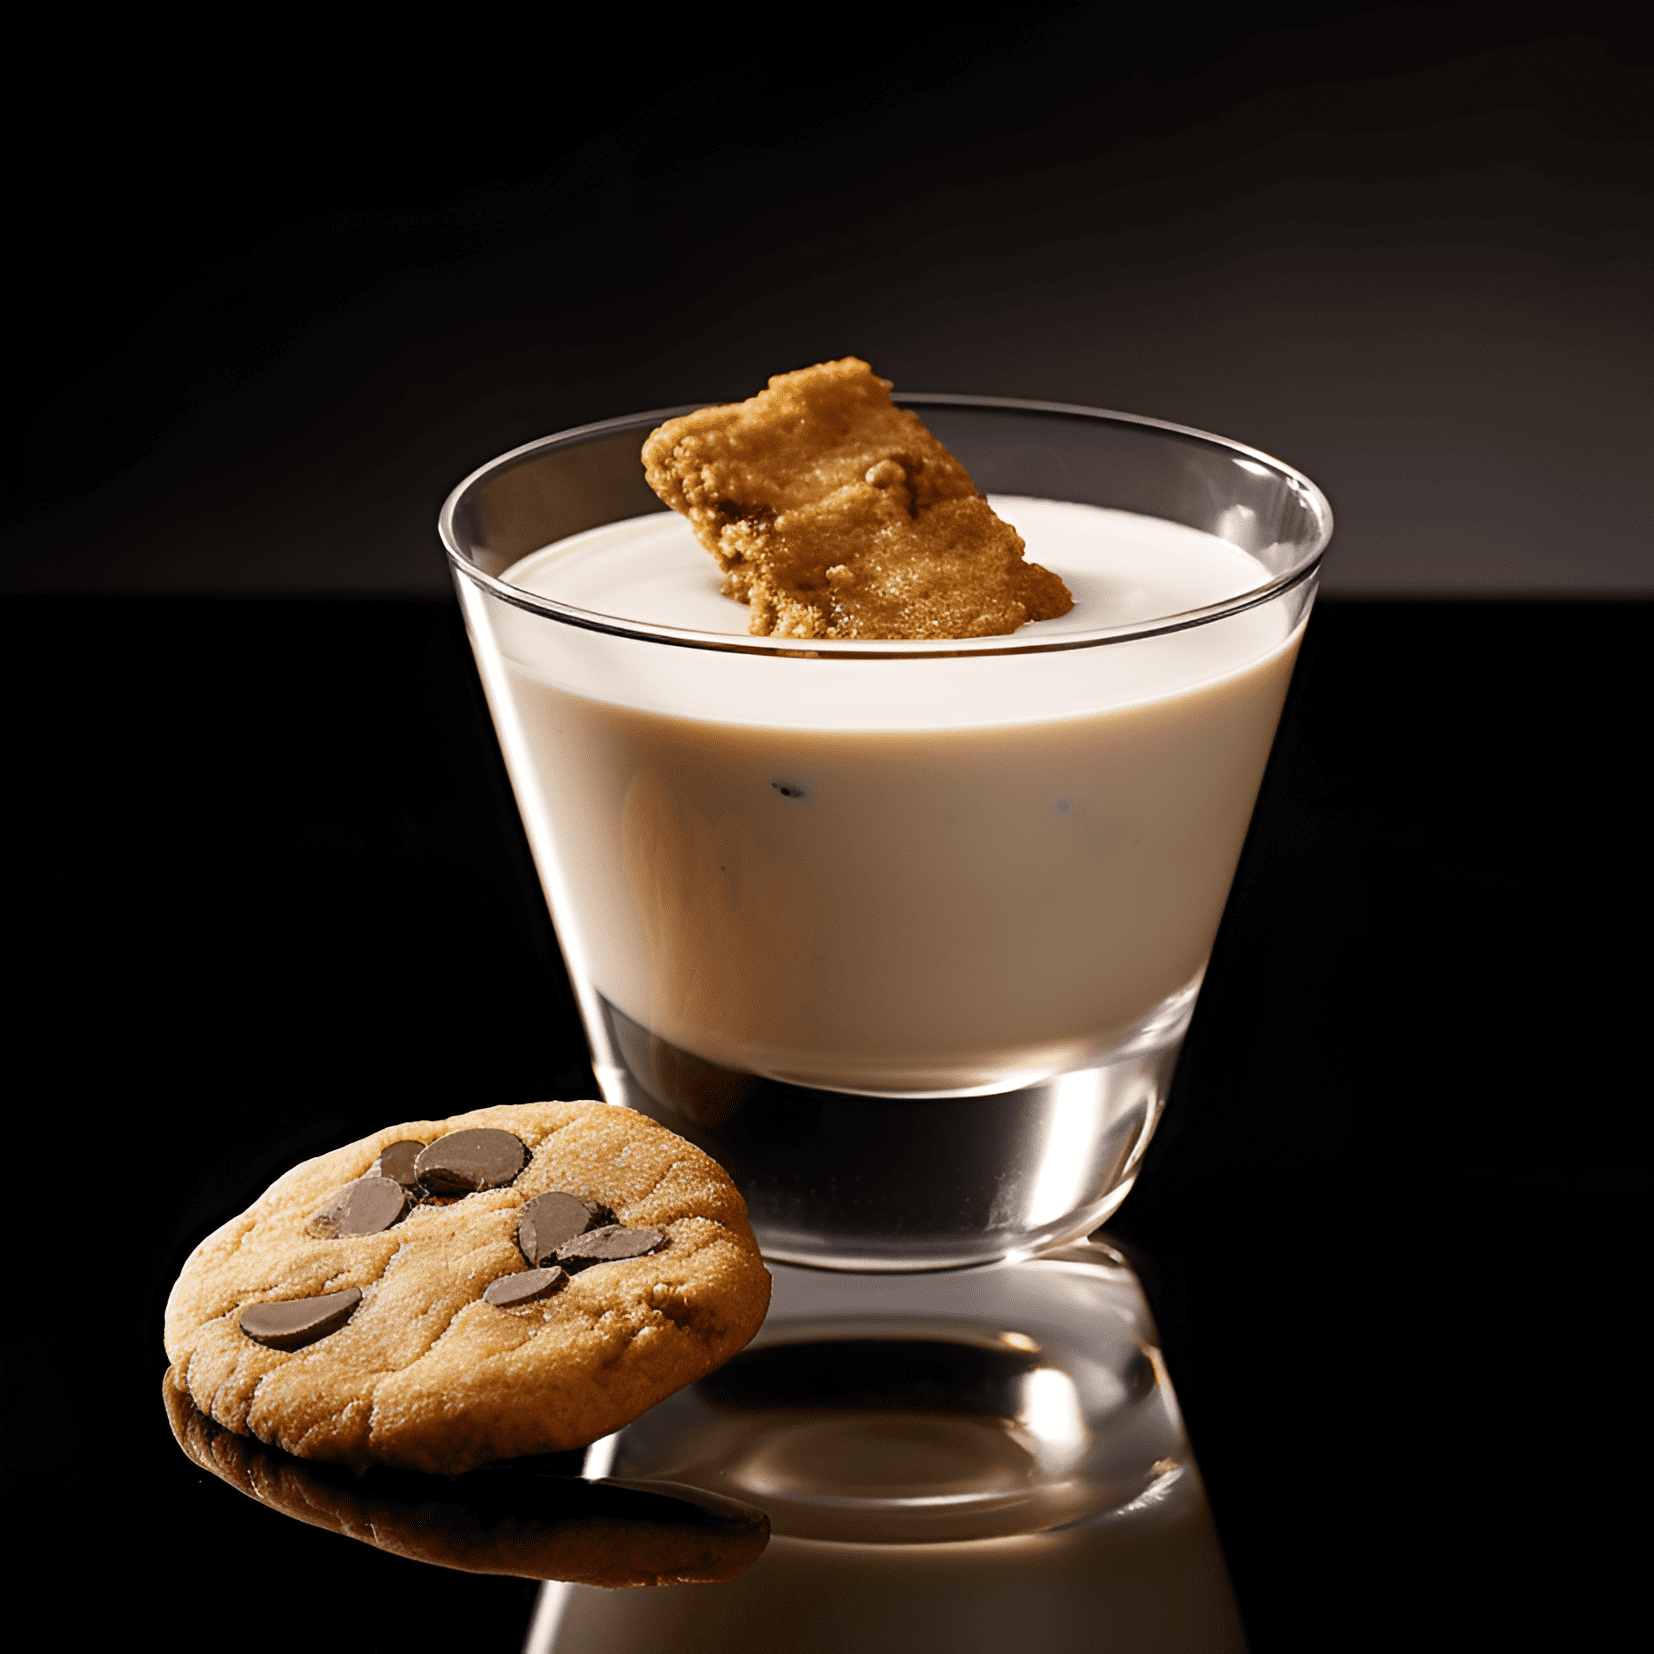 The Oatmeal Cookie cocktail is sweet, creamy, and rich in flavor. It has a smooth texture with hints of cinnamon and nutmeg, giving it a warm and comforting taste. The combination of liqueurs creates a balanced sweetness that is not overly cloying.